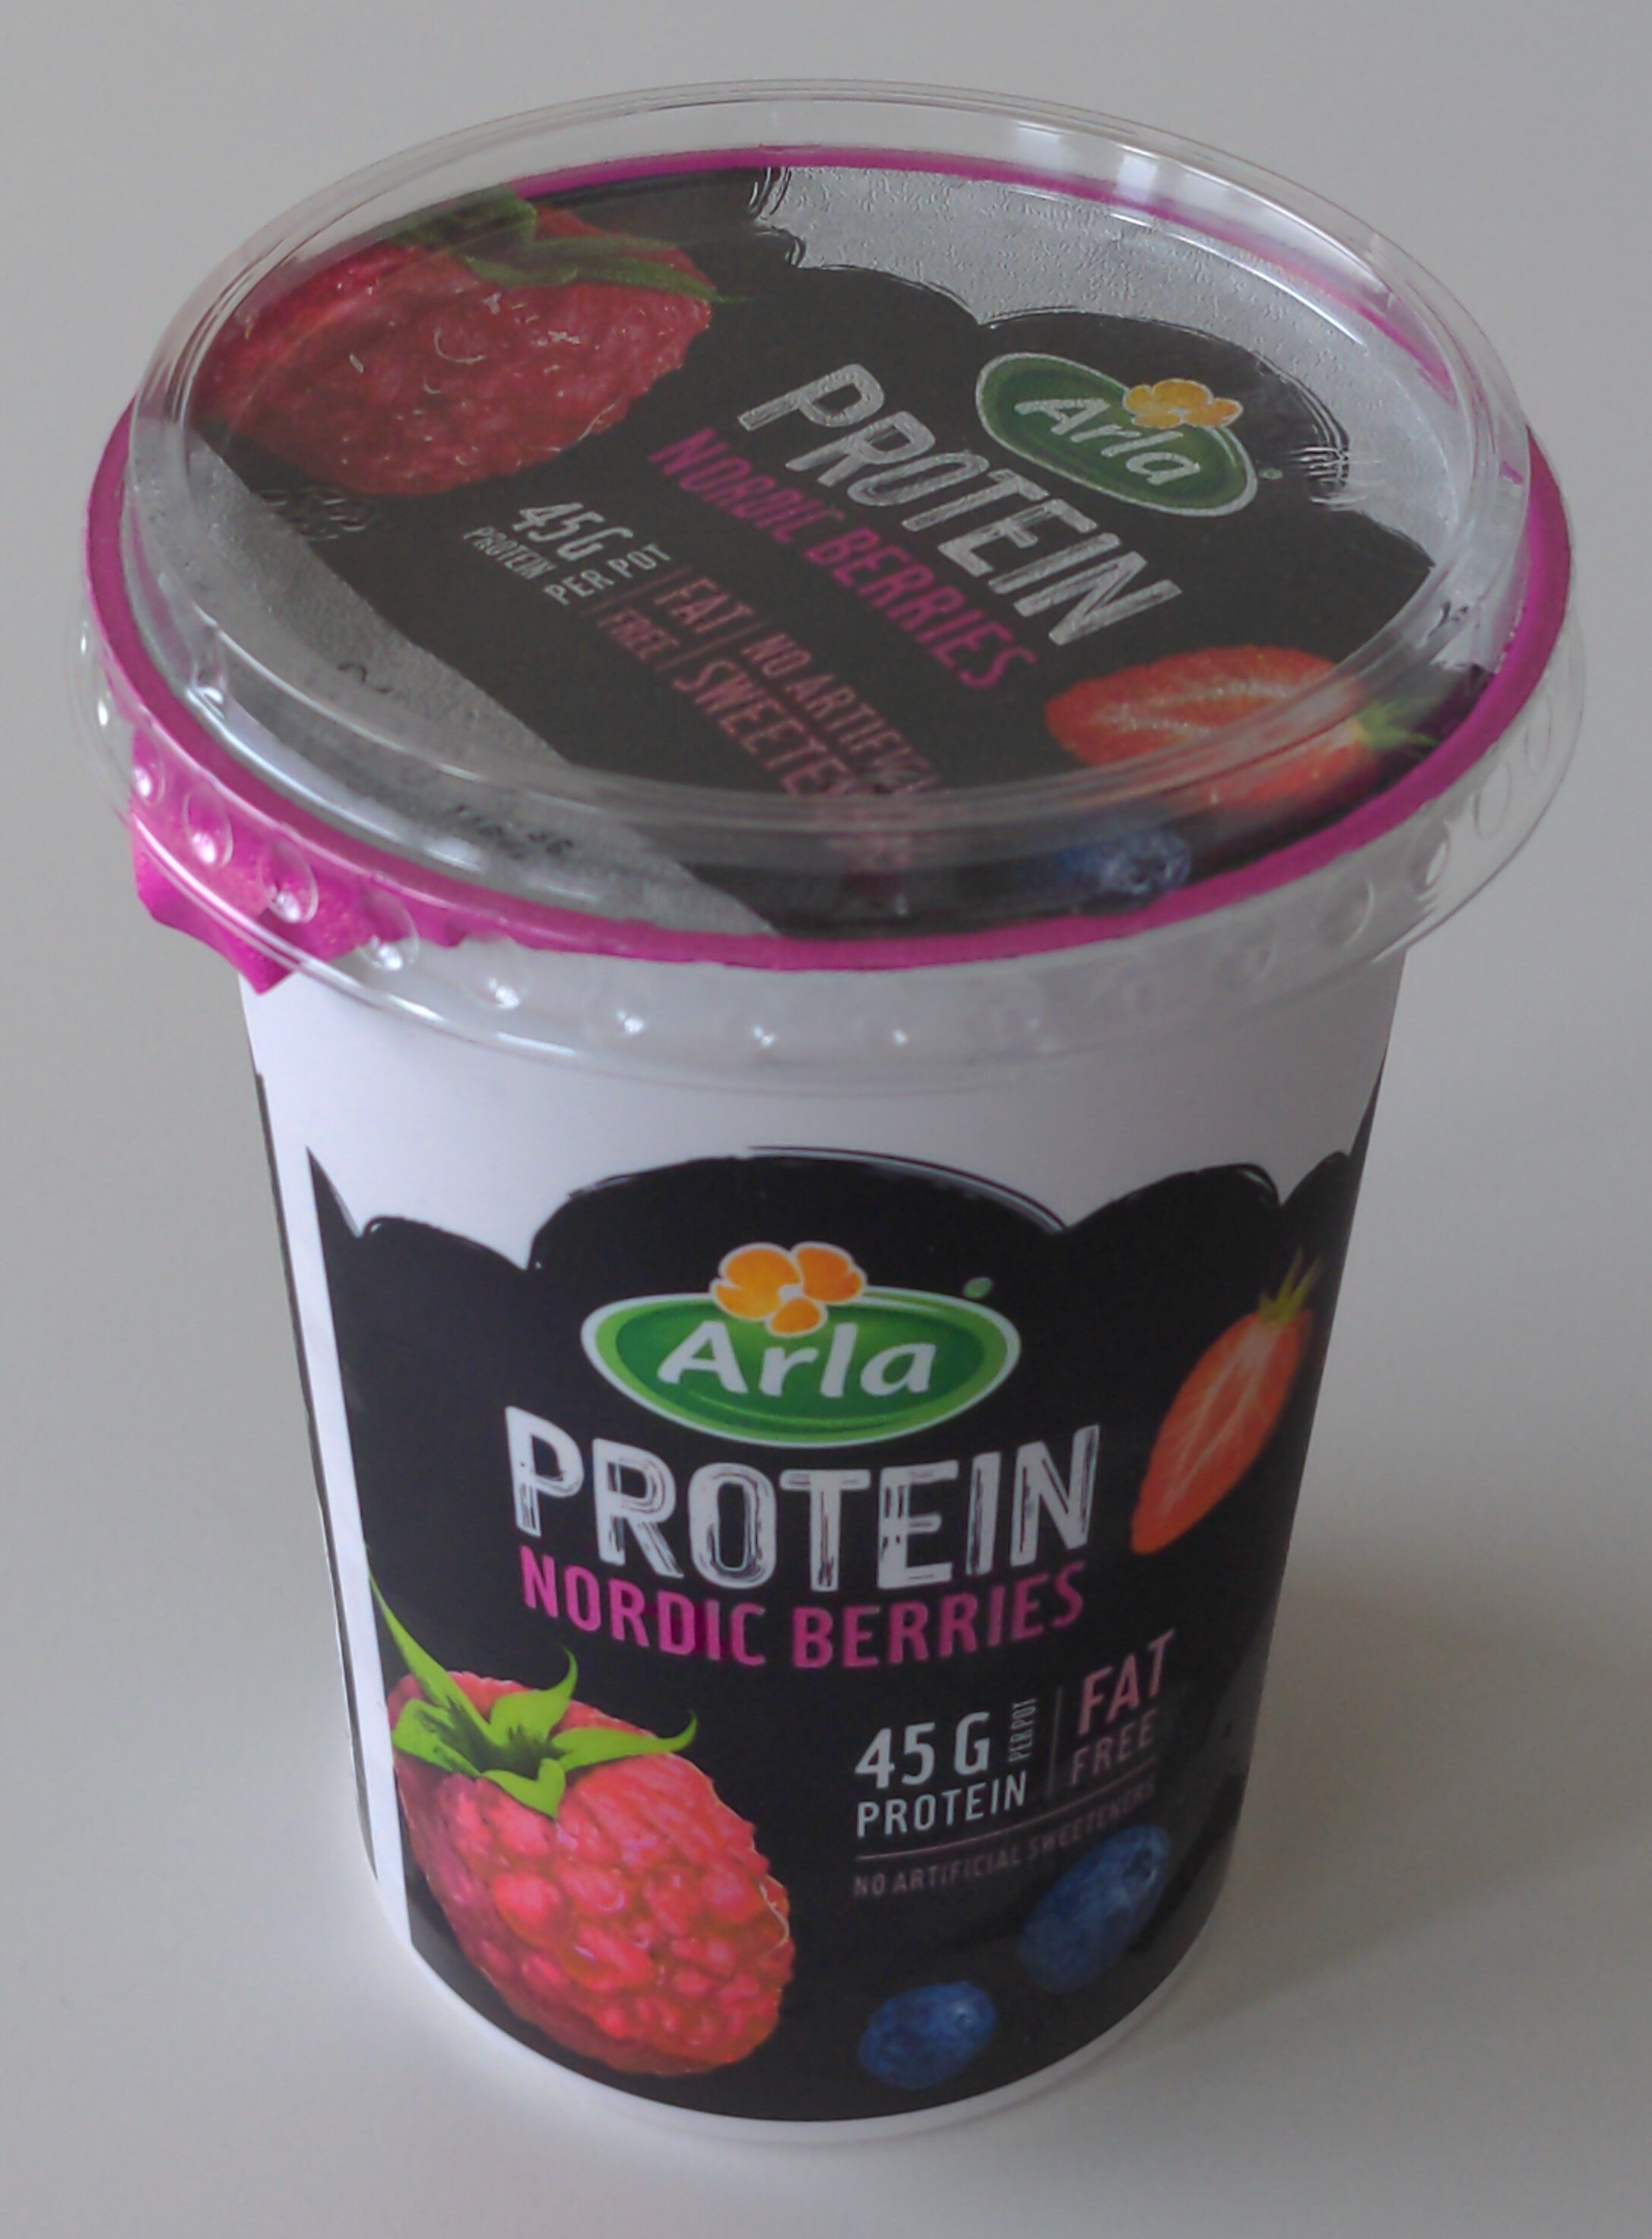 Protein Nordic Berries - Tuote